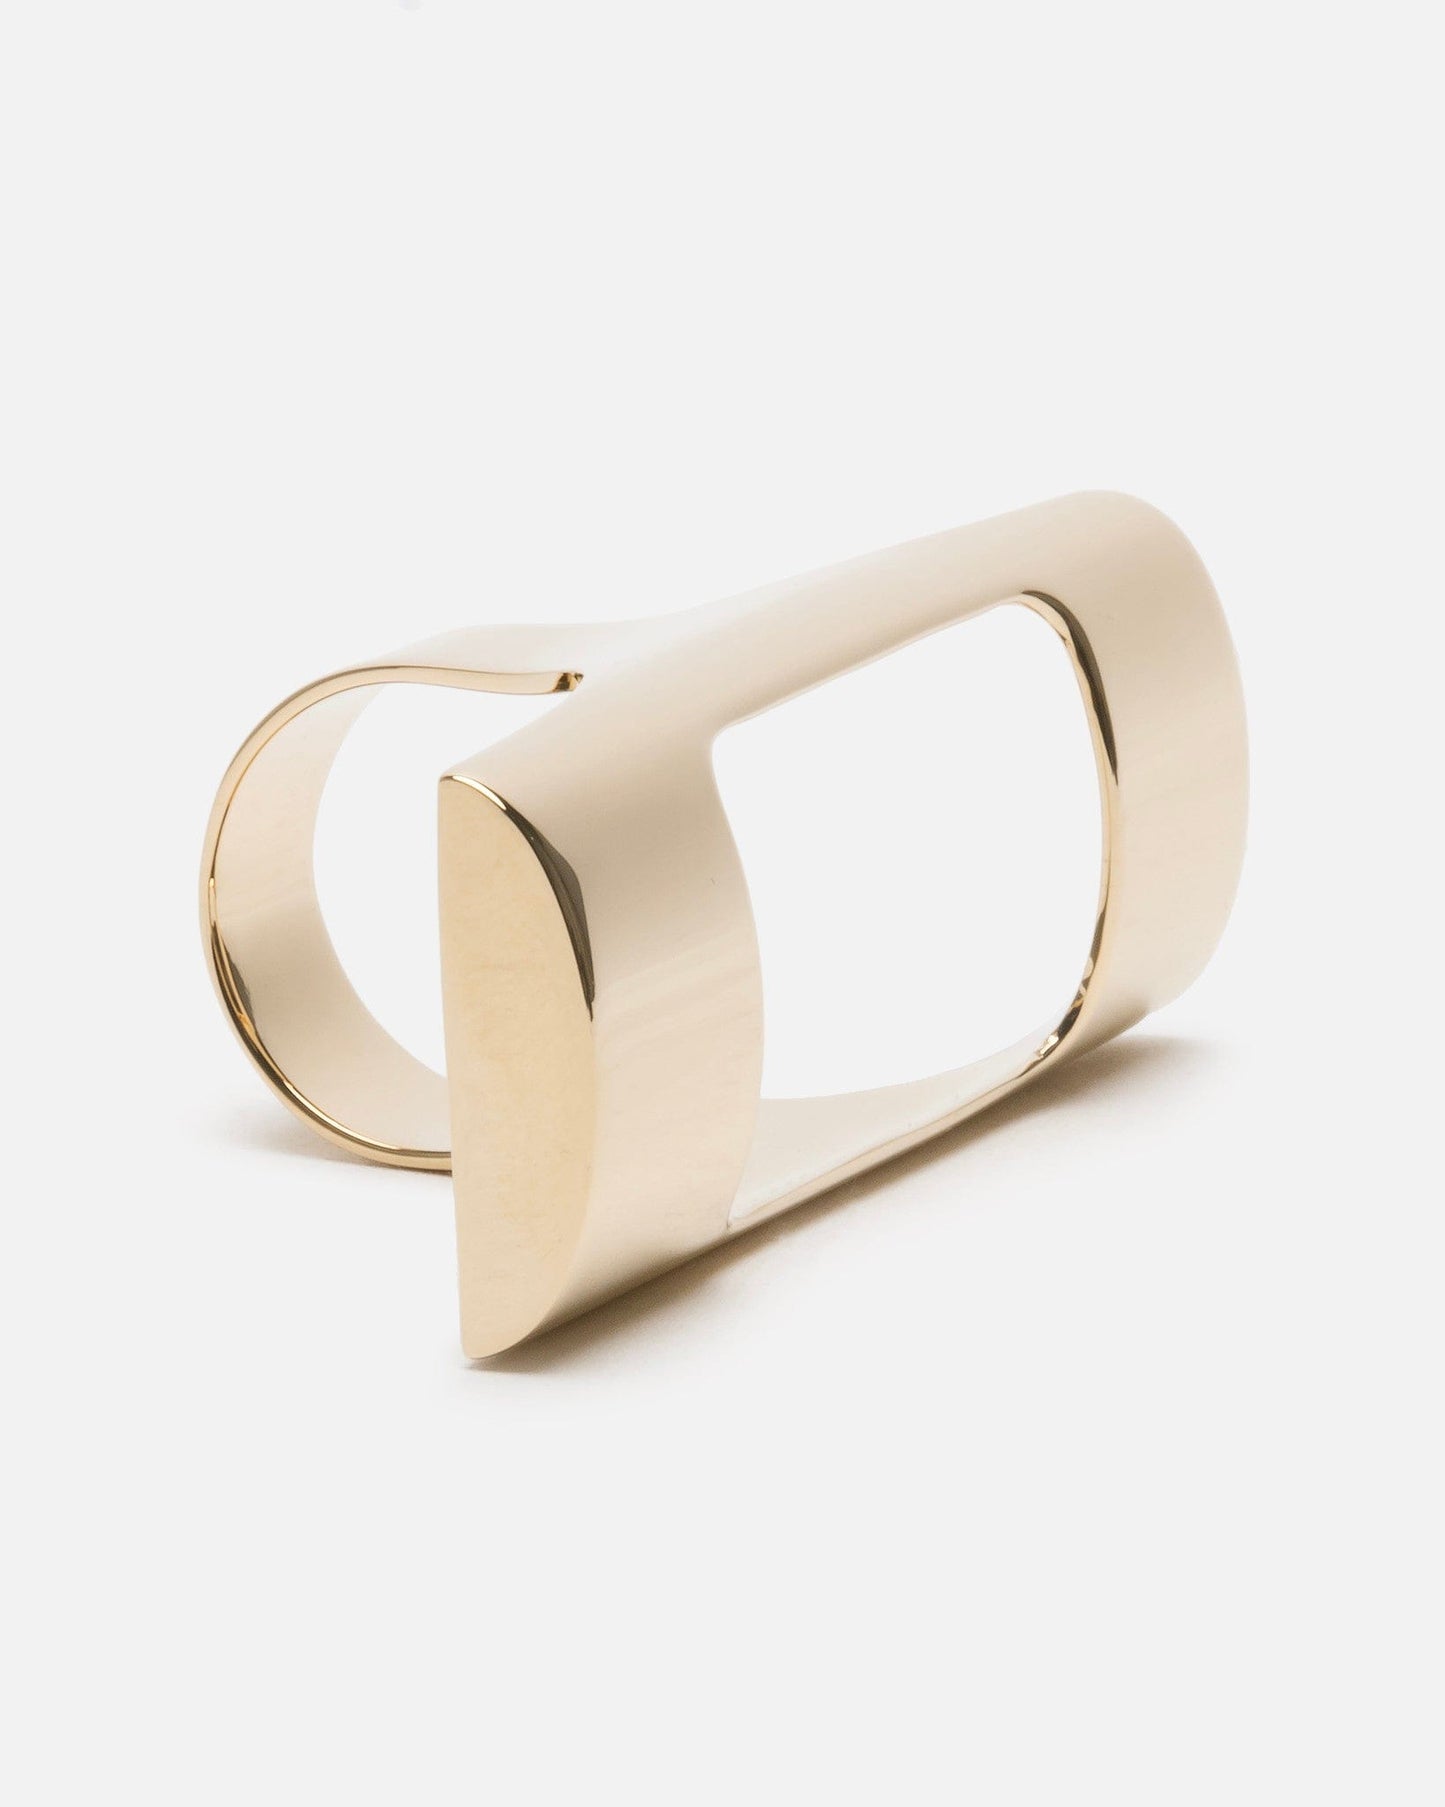 VETEMENTS Jewelry Lighter Holder Ring in Gold